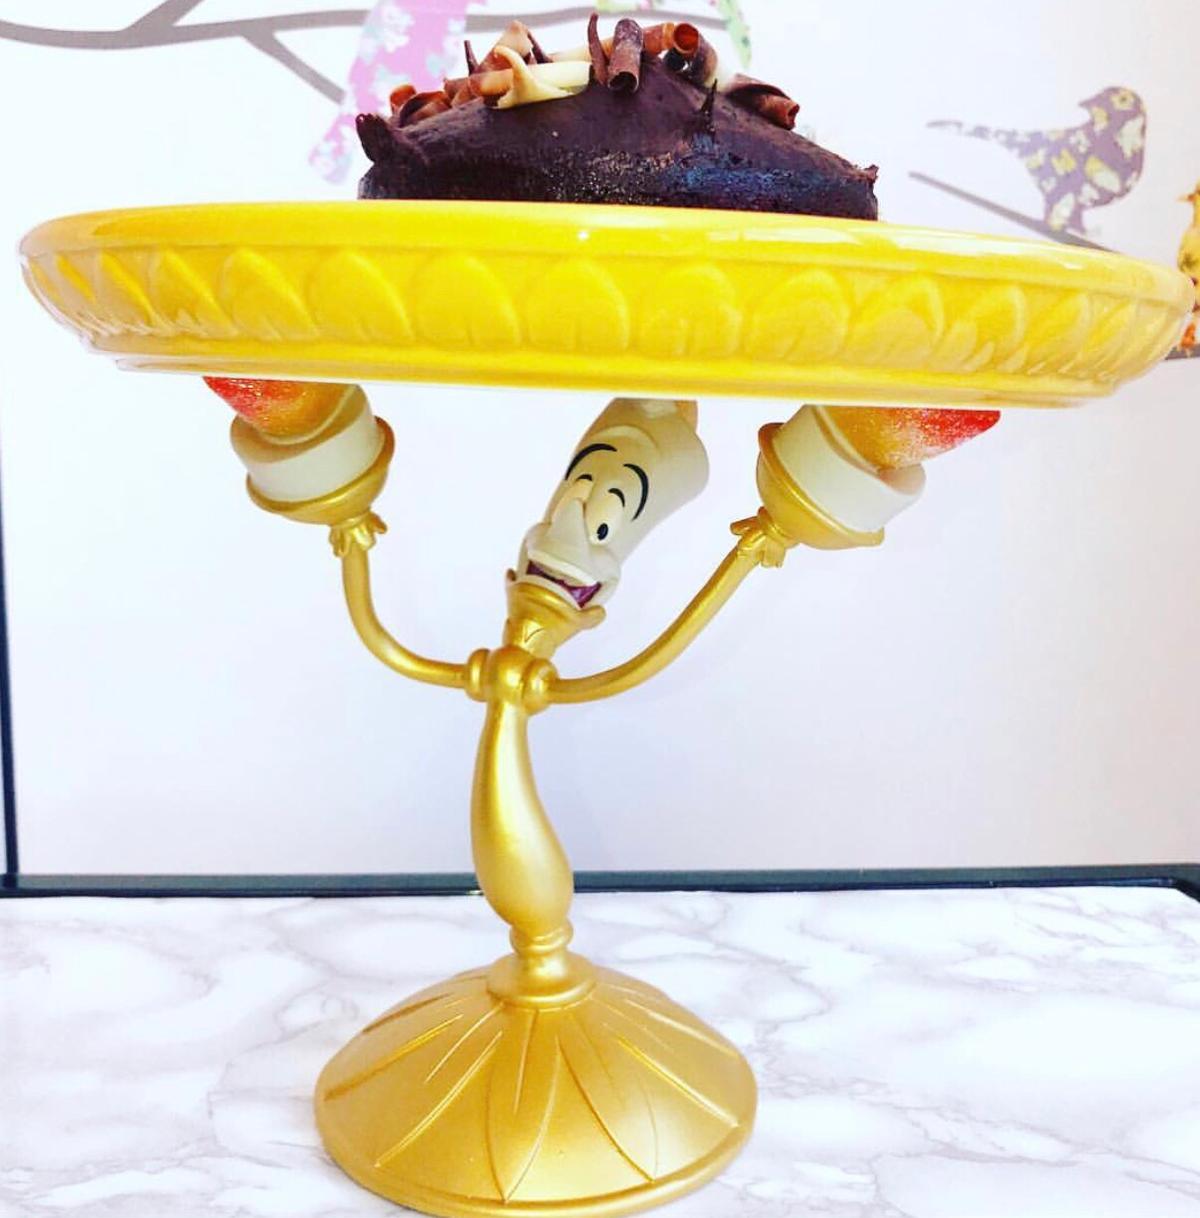 Disney store Lumiere cake stand beauty beast in RM3 Havering for £20.00 ...